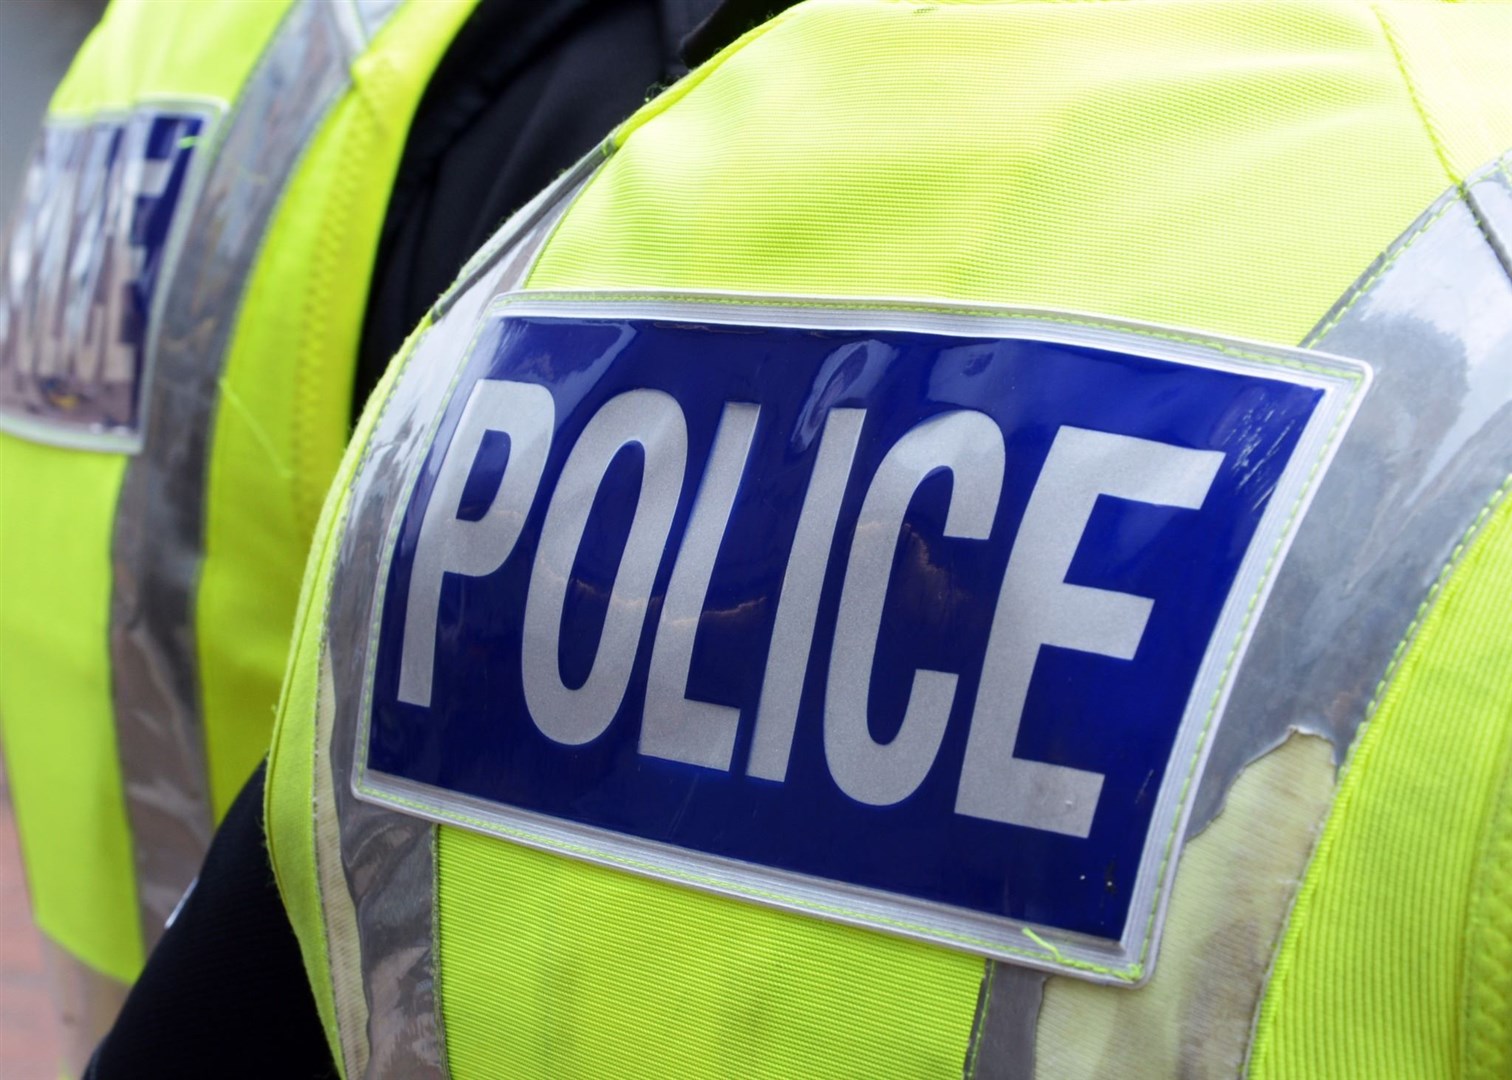 Police have confirmed the body of a woman has been found in an Inverness property.